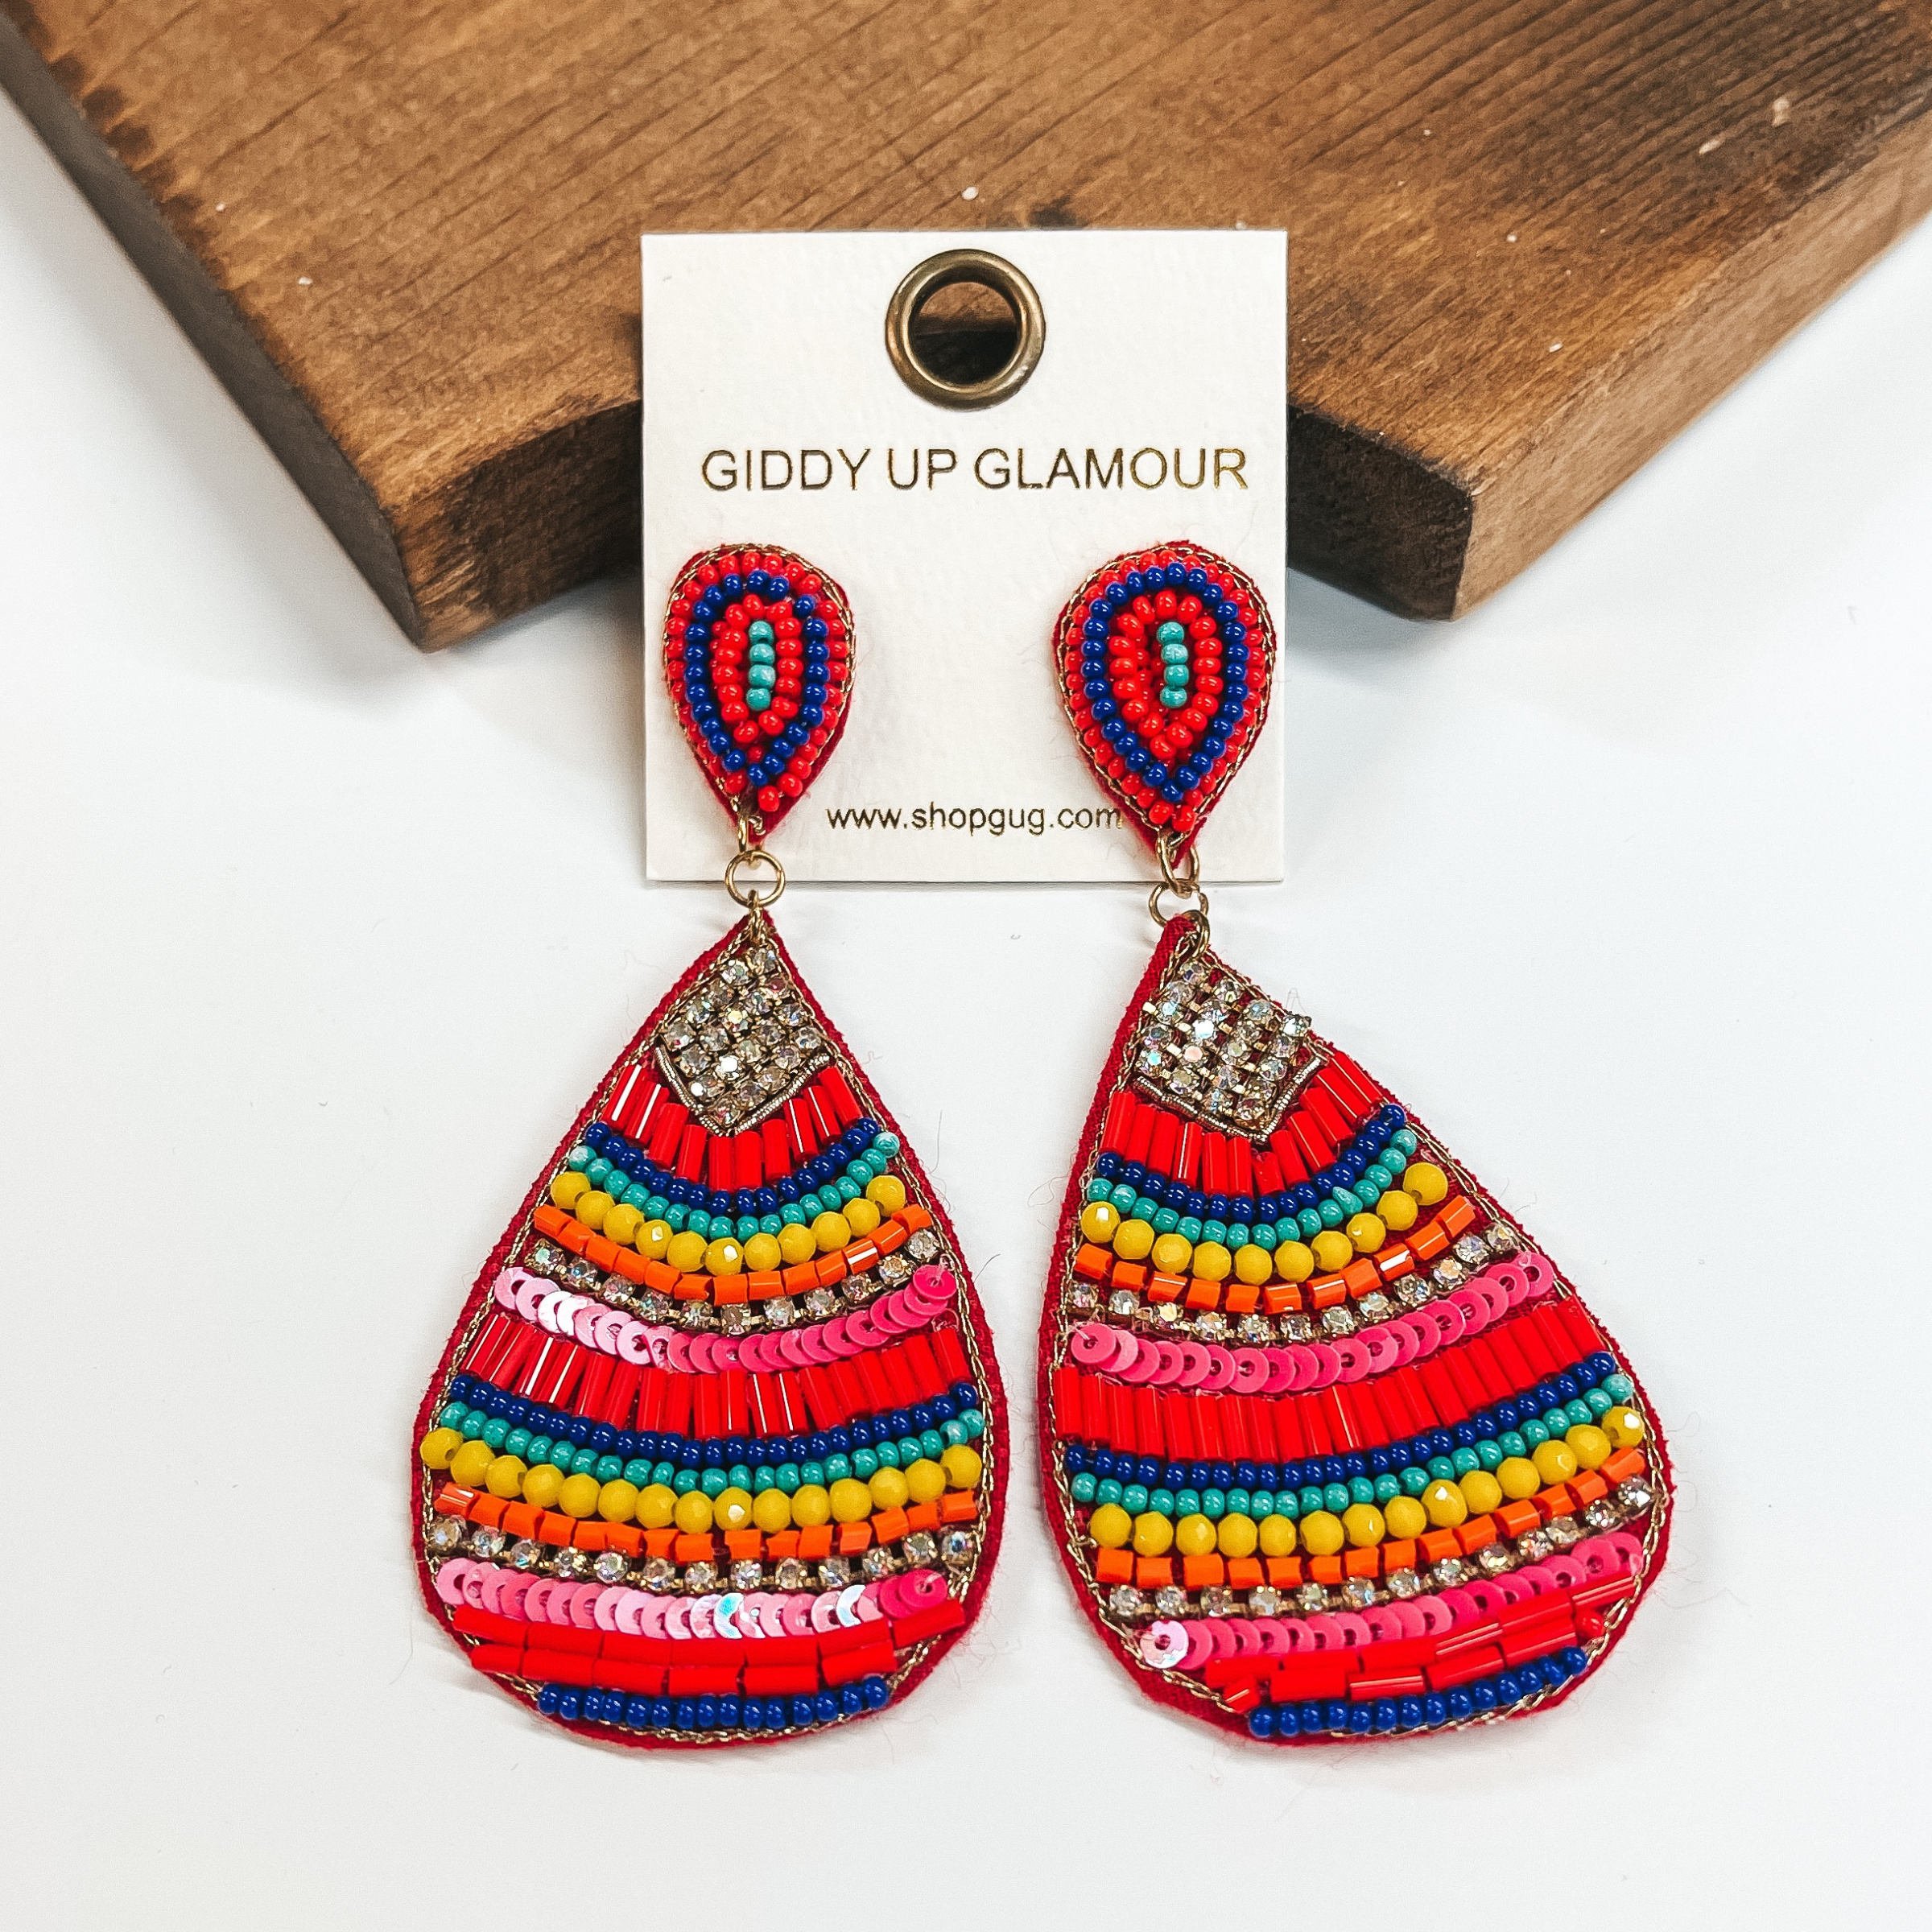 These are multicolored teardrop earrings with a mix  of beads and crystals. There is a mix of different  sizes and colors of beads such as orange, red, blue,  yellow, pink, and turquoise. There is also sequins  and crystals. These earrings are taken on a white  background and leaned up against a brown block.